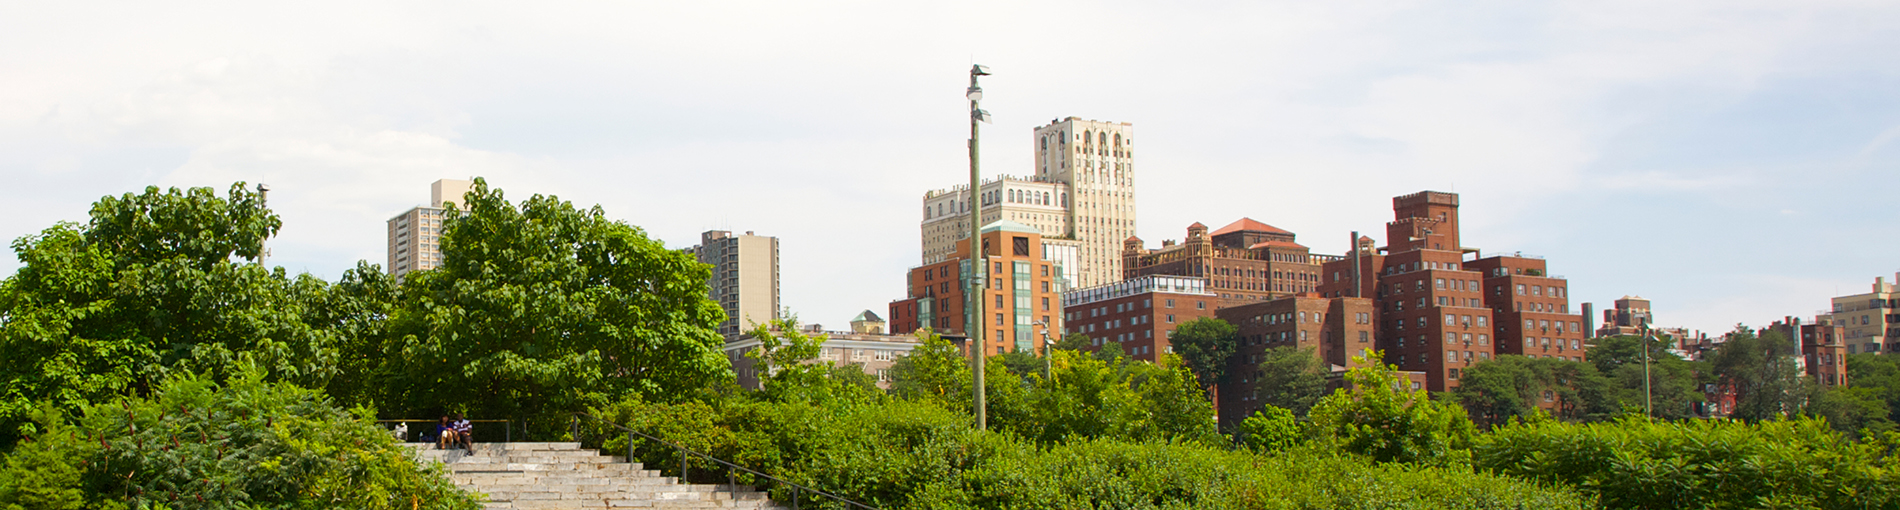 affordable rentals nyc - header image of nyc park and buildings